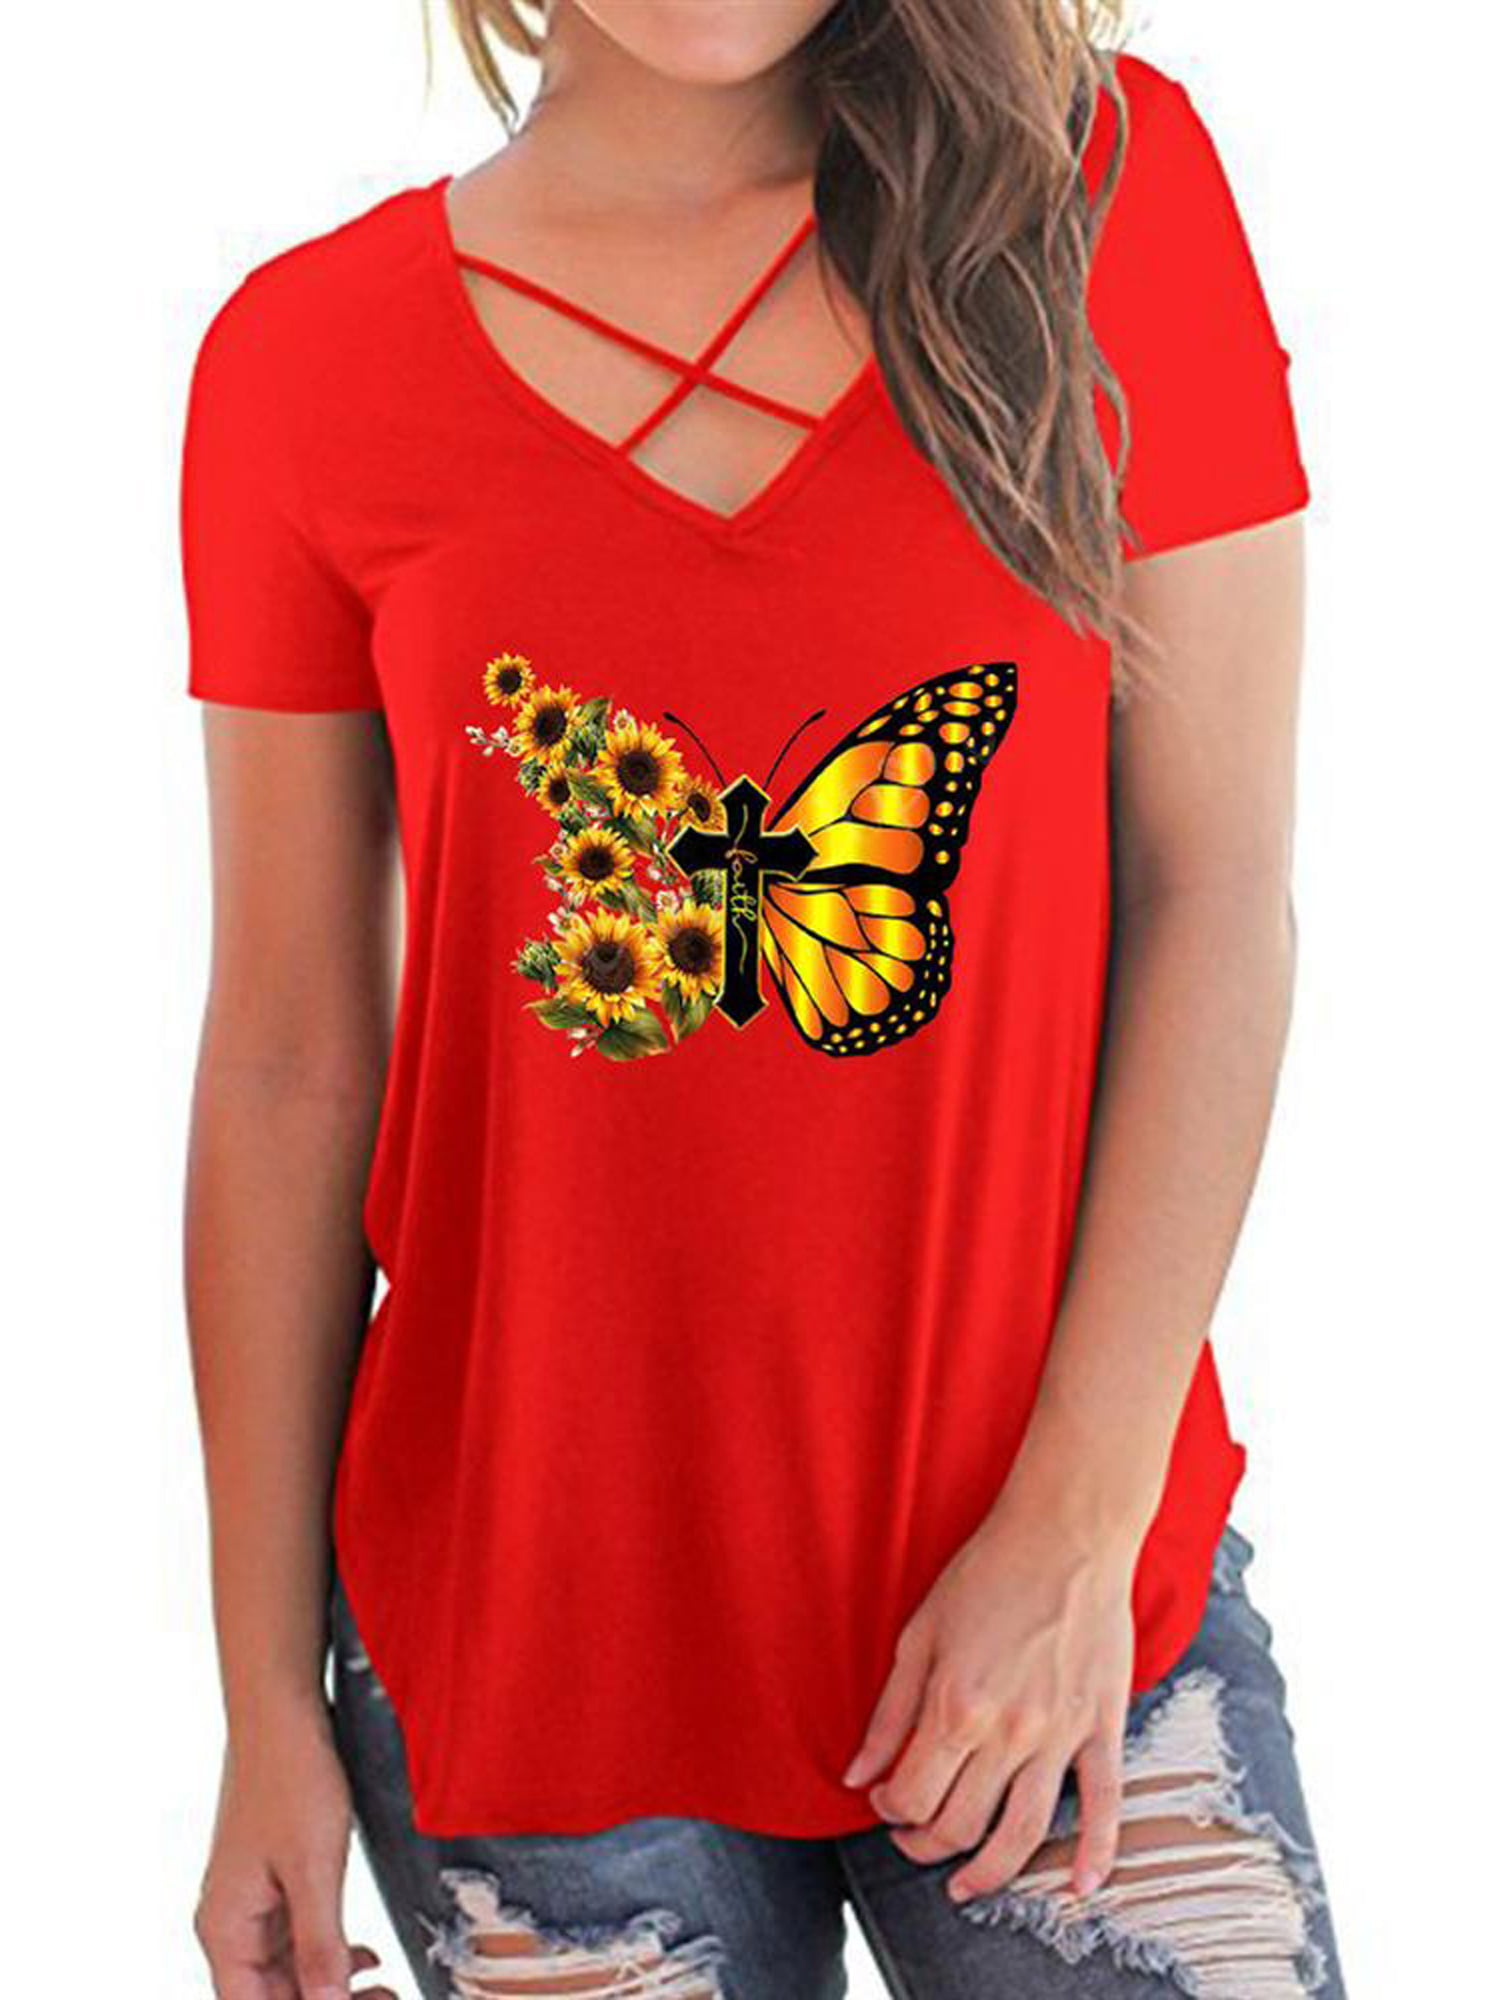 Plus Size Womens V Neck Summer Tee Tops Ladies Print Casual Loose T-Shirt Blouse